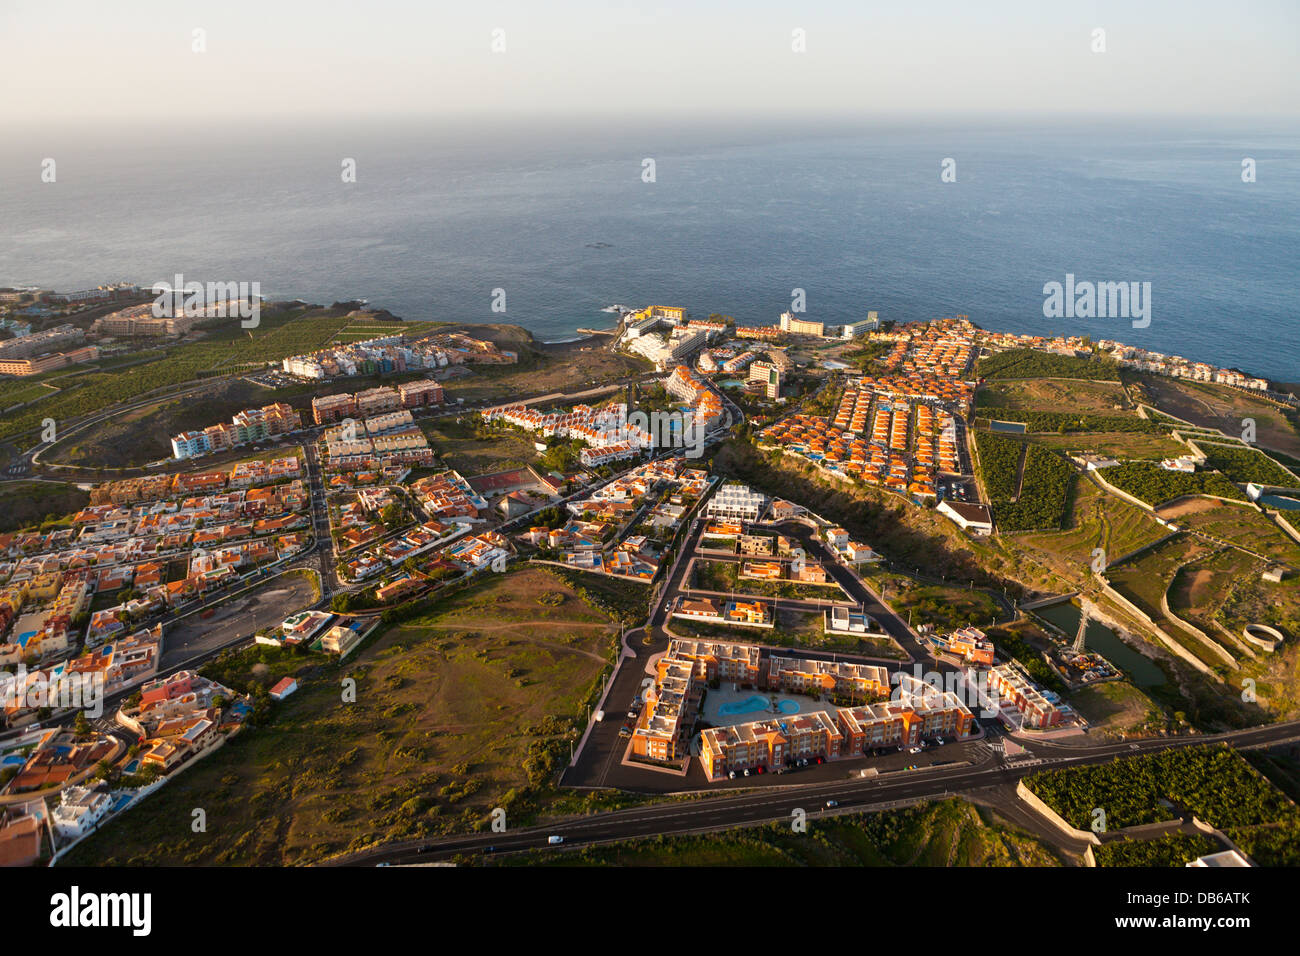 Hotel Facilities in Southwest of Tenerife, Tenerife, Canary Islands, Spain Stock Photo